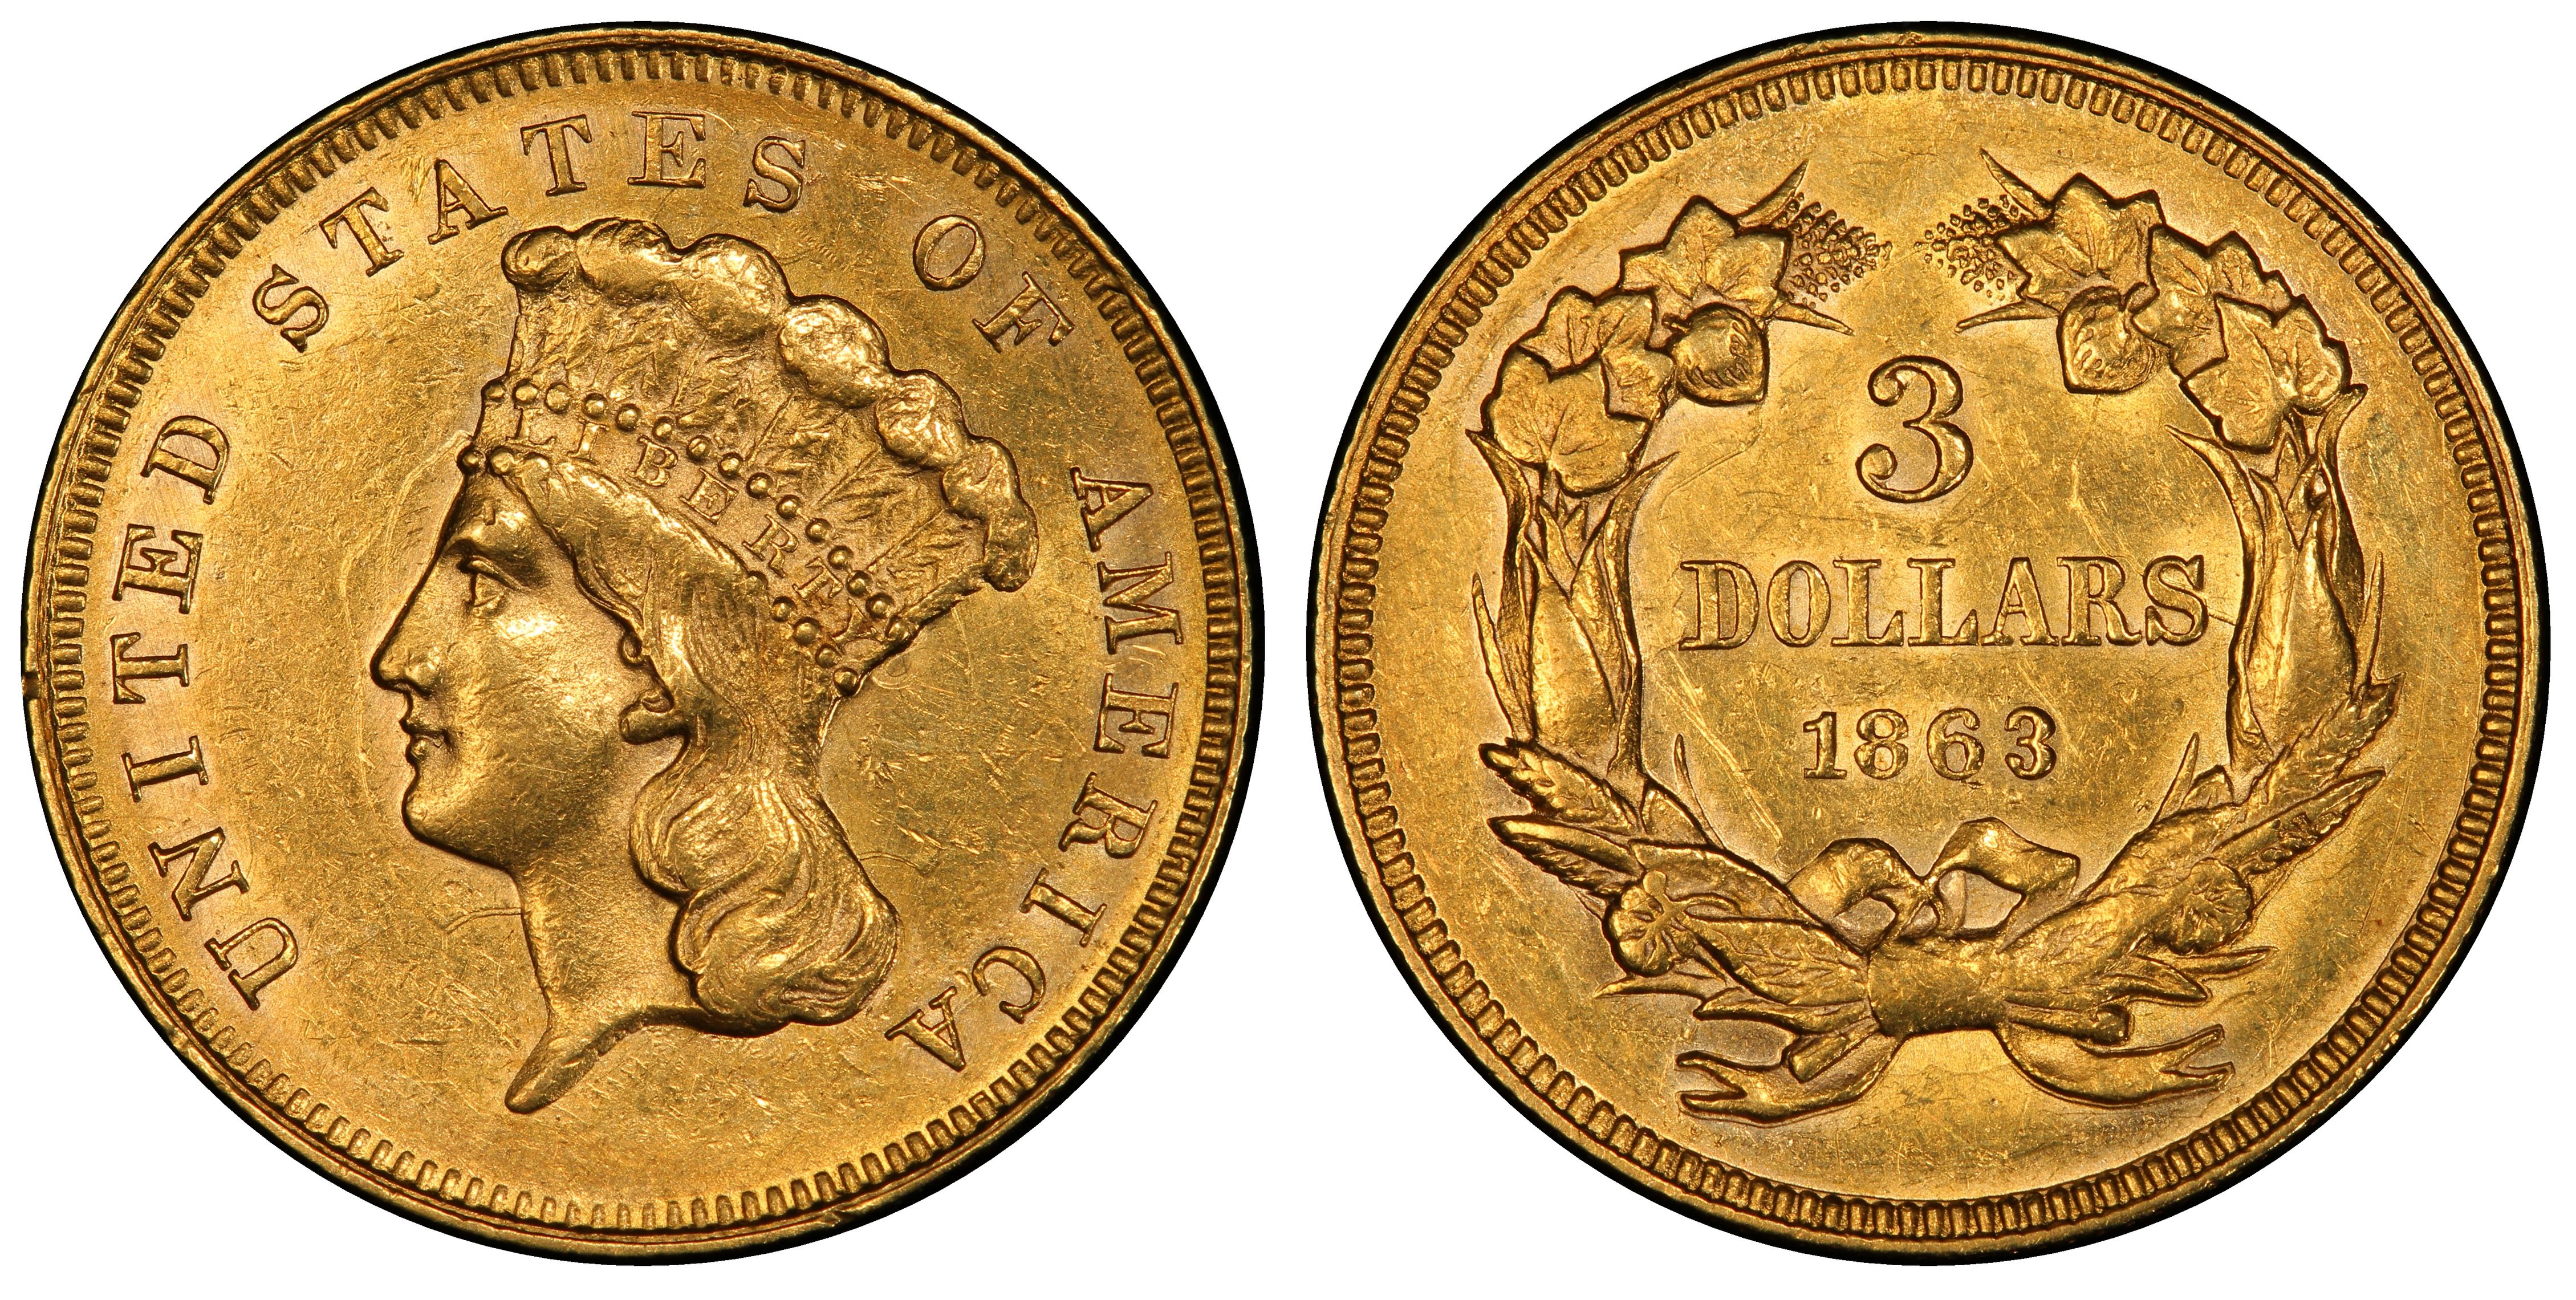 Images of Three Dollar 1863 $3 - PCGS CoinFacts